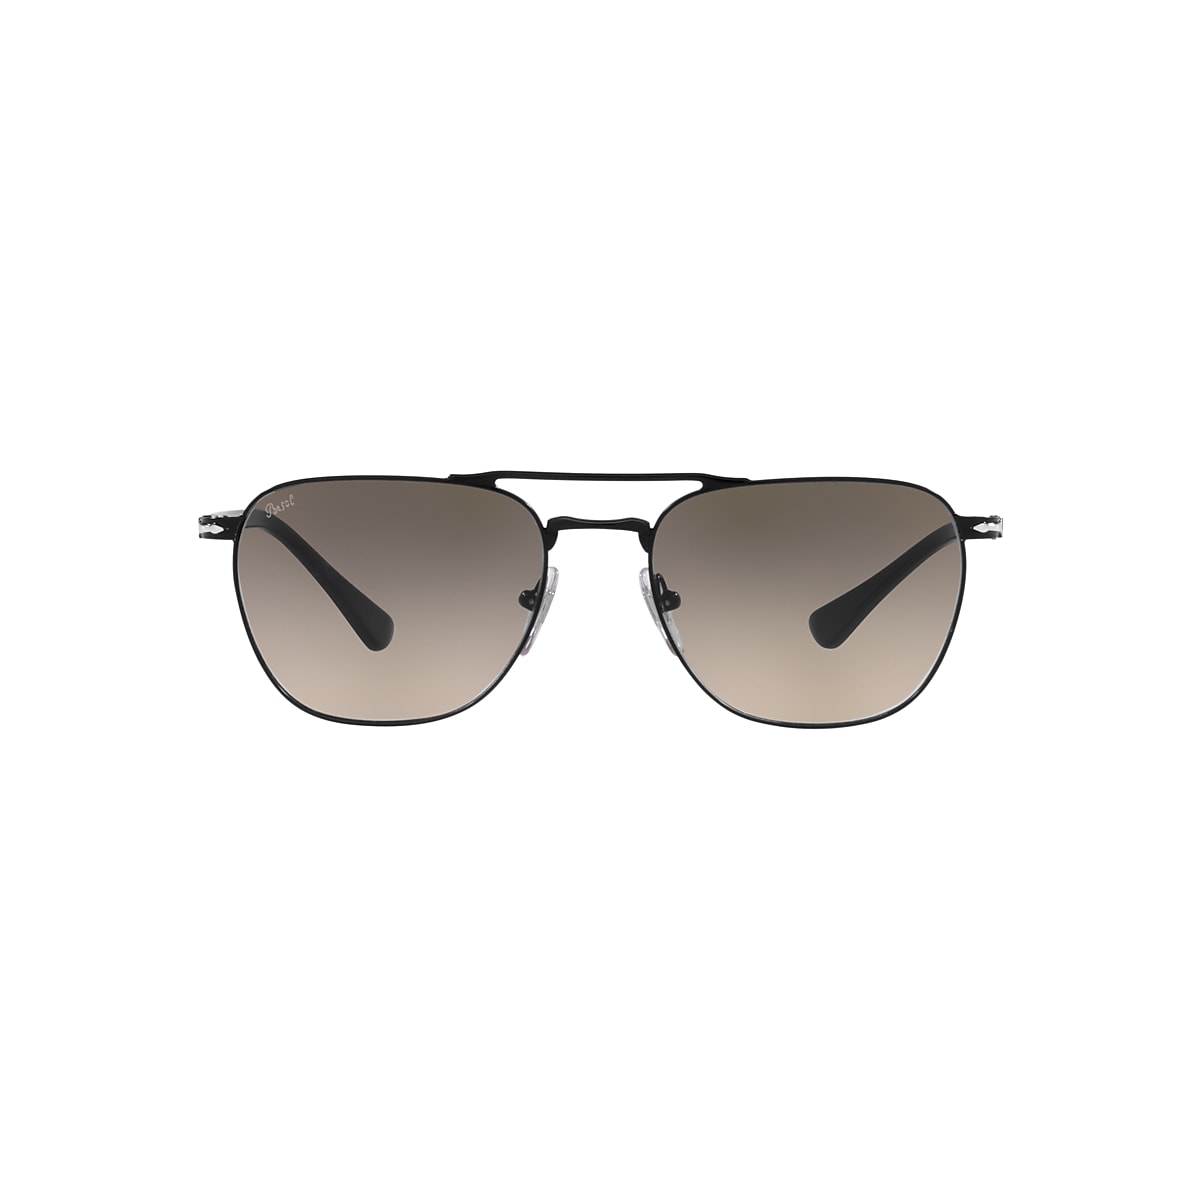 decide Dent Playing chess Persol PO2494S Sunglasses in Black | Persol®